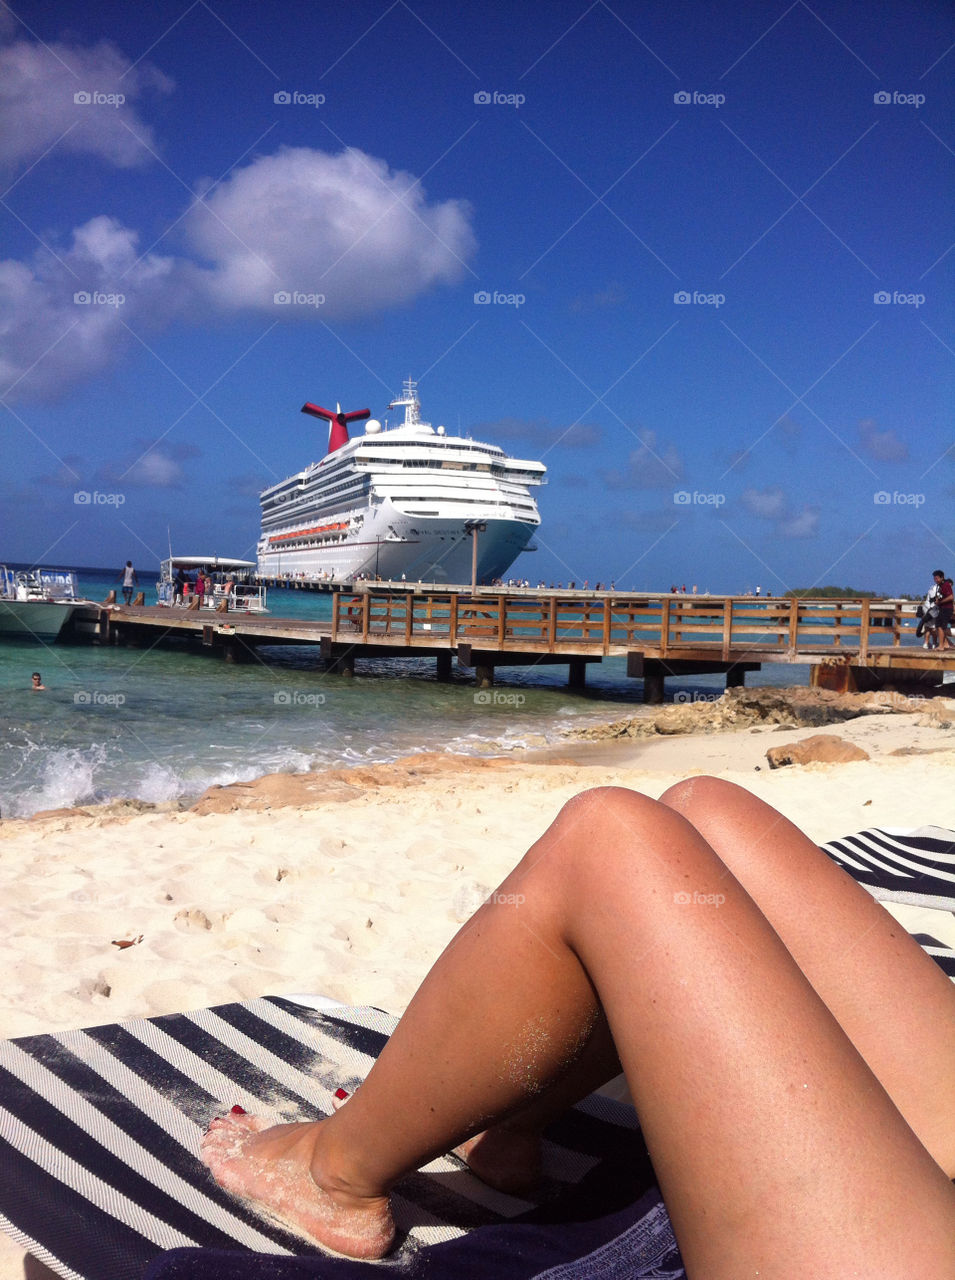 A woman's legs in front of a large cruise ship.